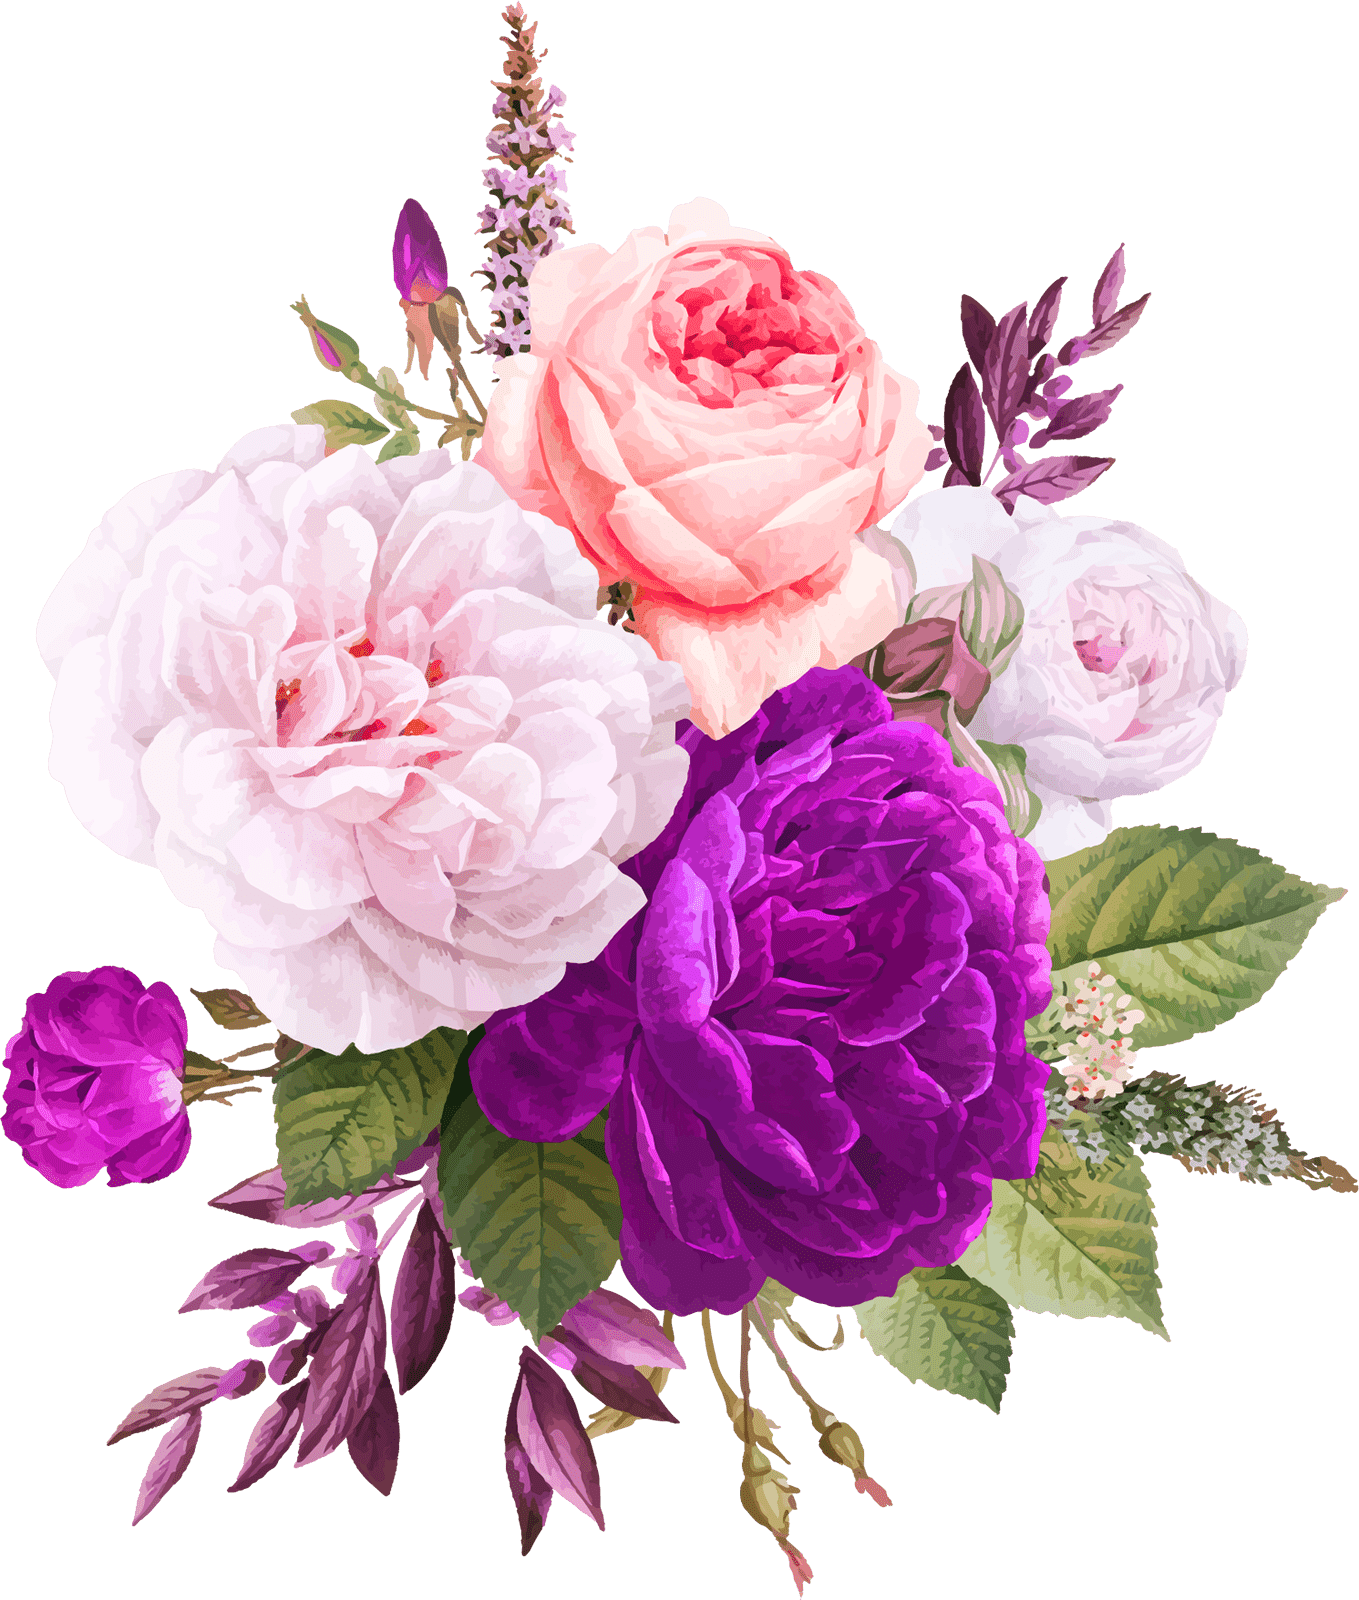 Free Flower Png Images Download Free Flower Png Images Png Images Images